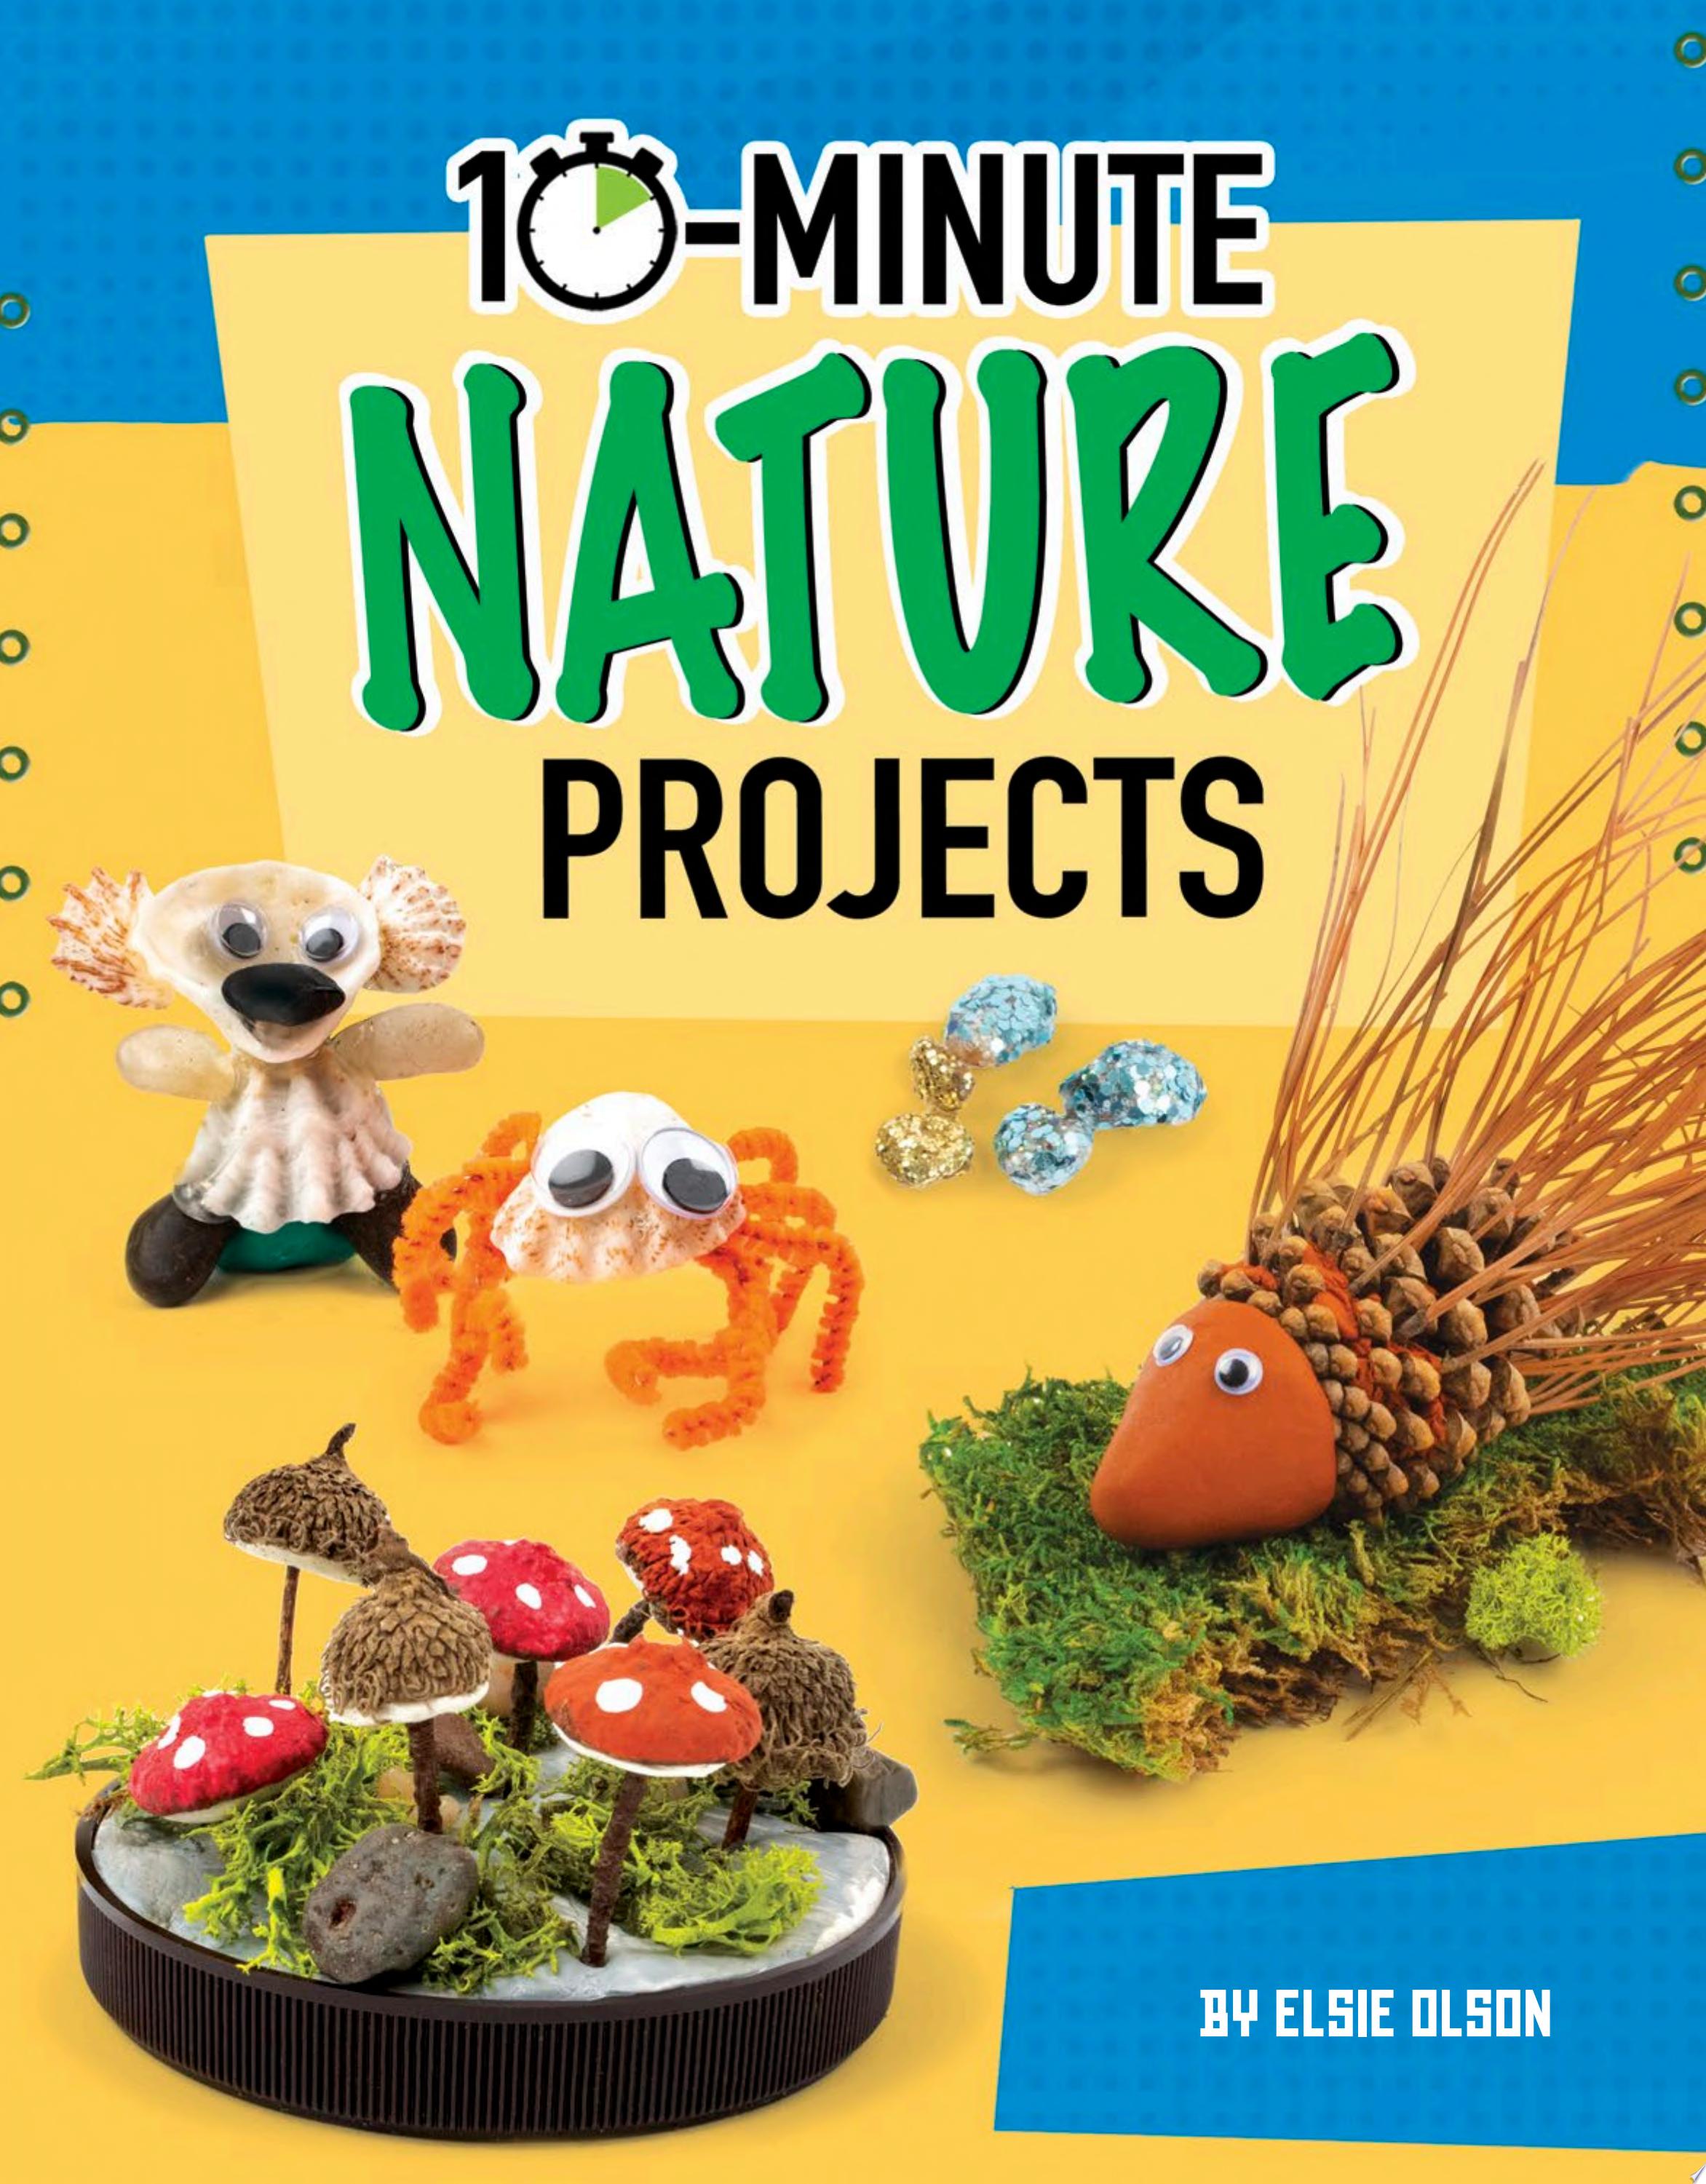 Image for "10-Minute Nature Projects"